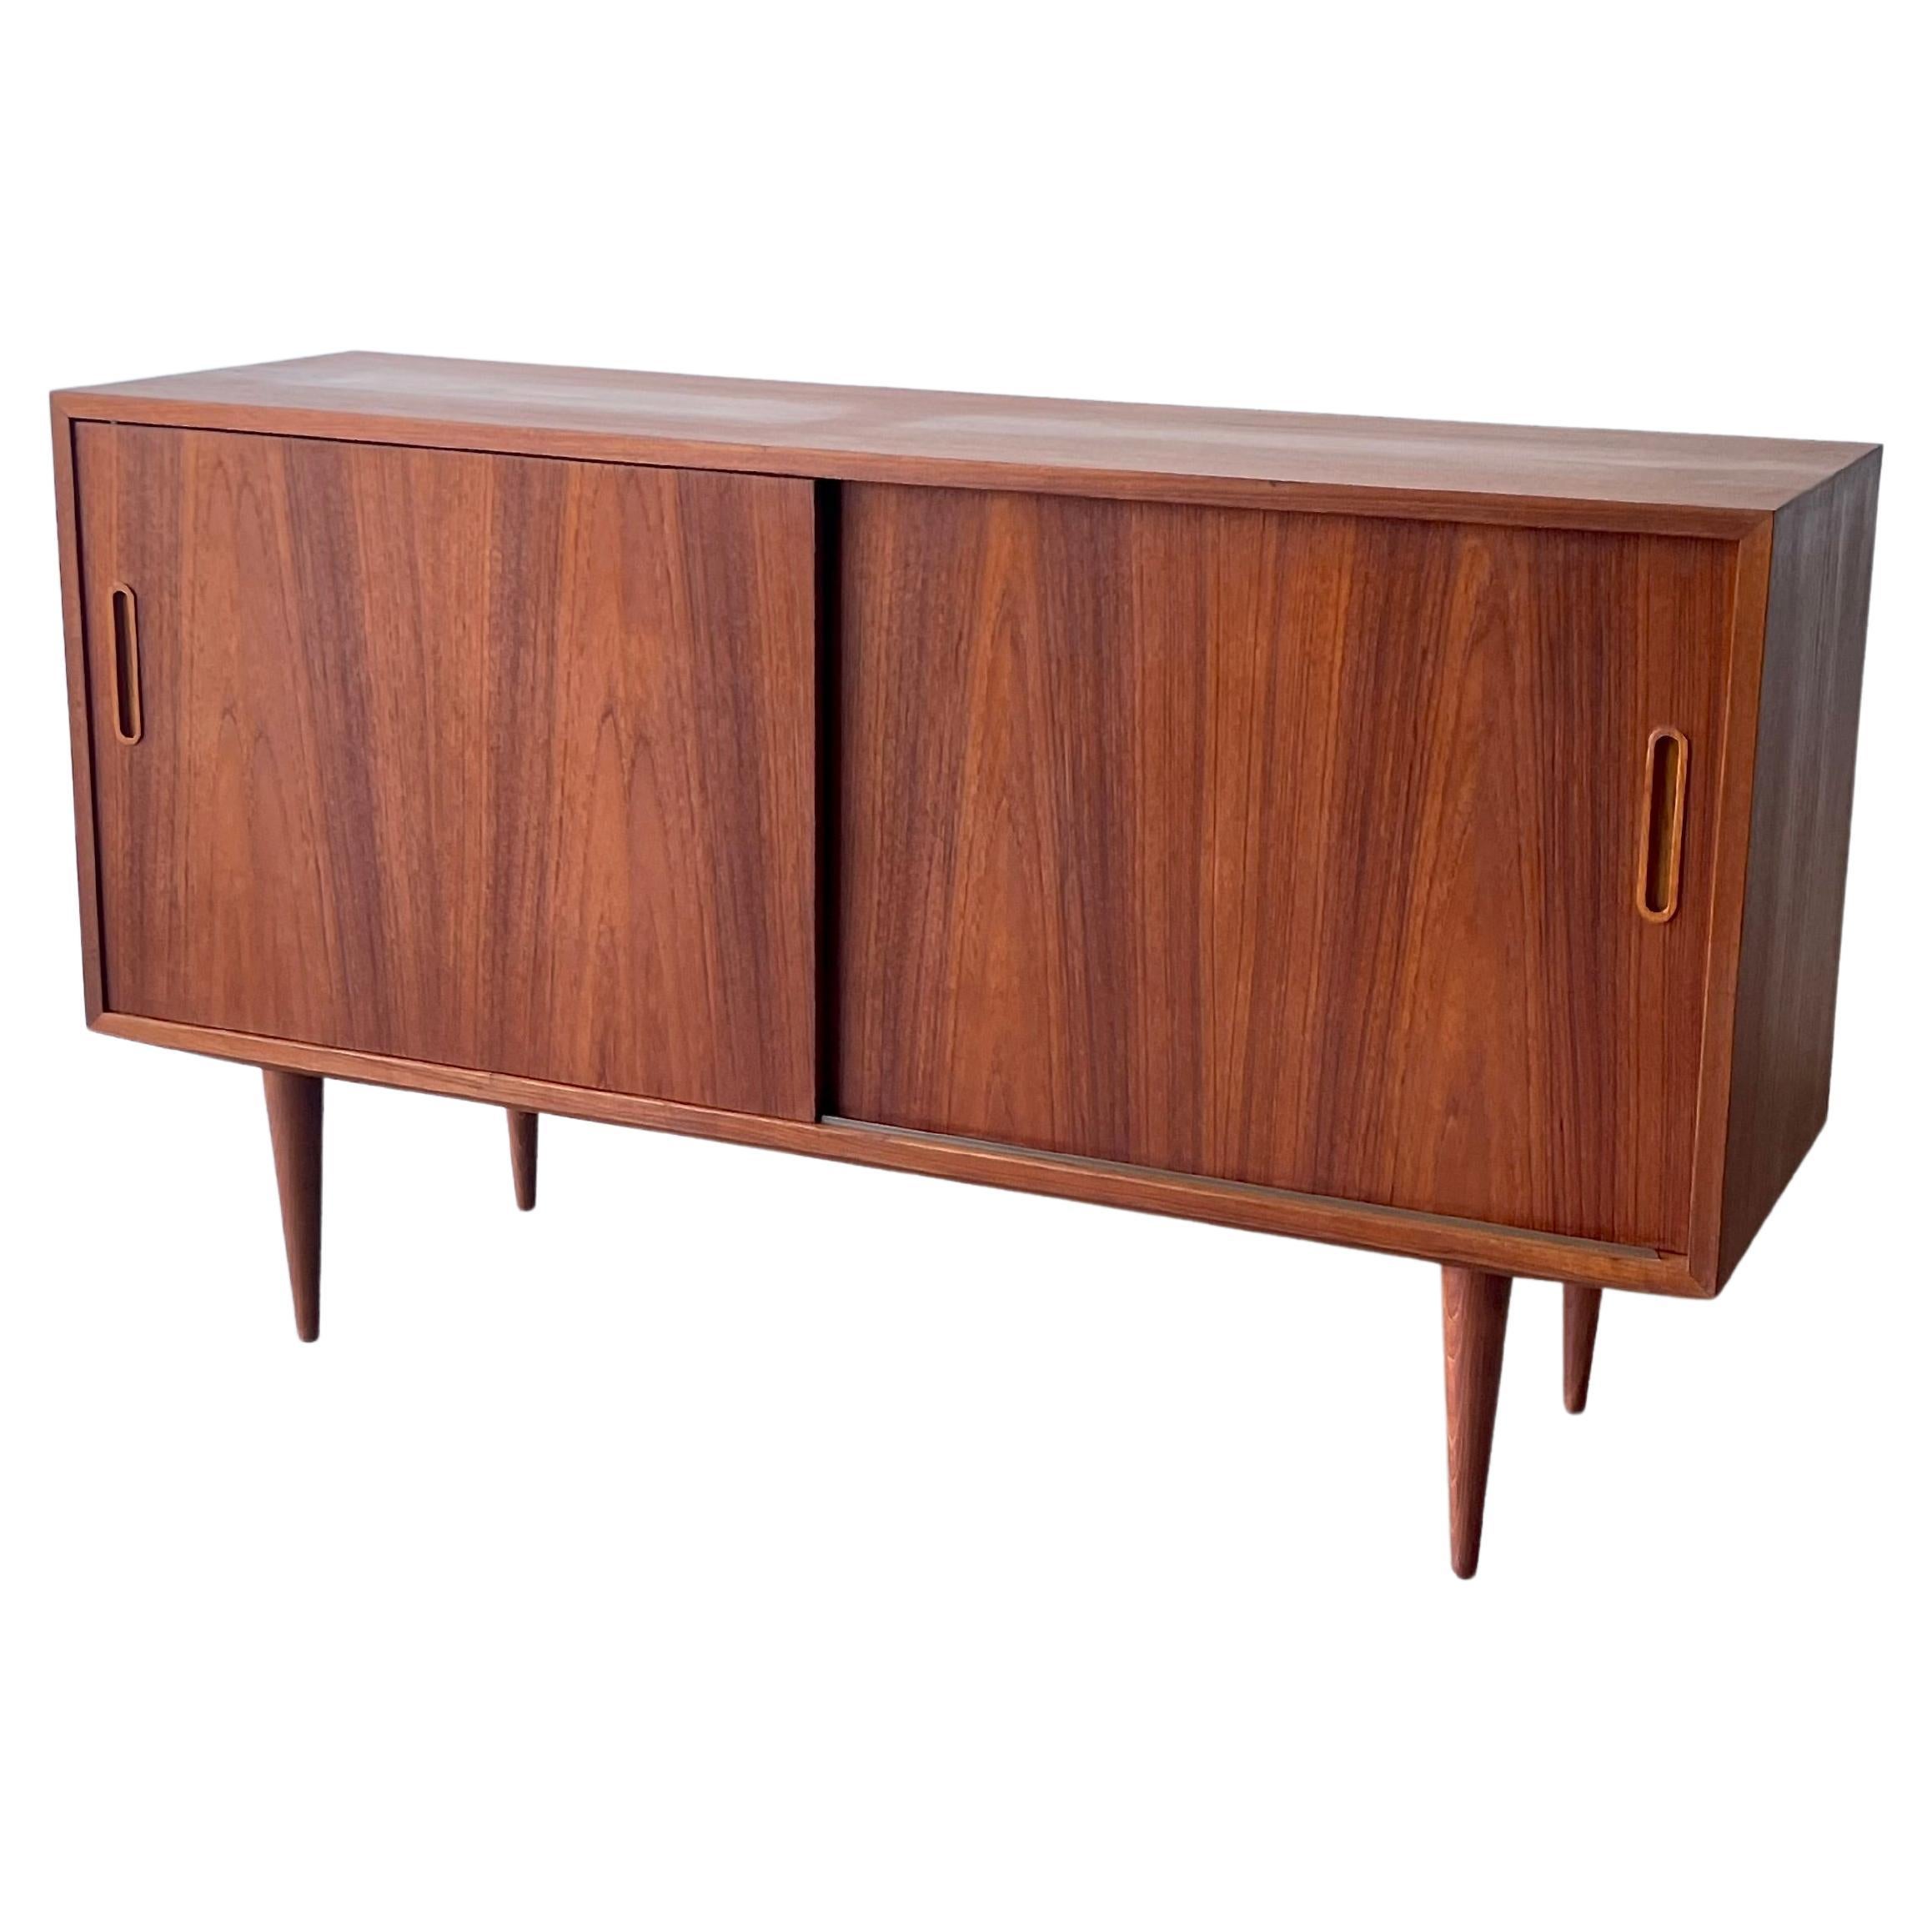 Set of Two Large Danish Mid-Century Modern Credenza Bookcases at 1stDibs